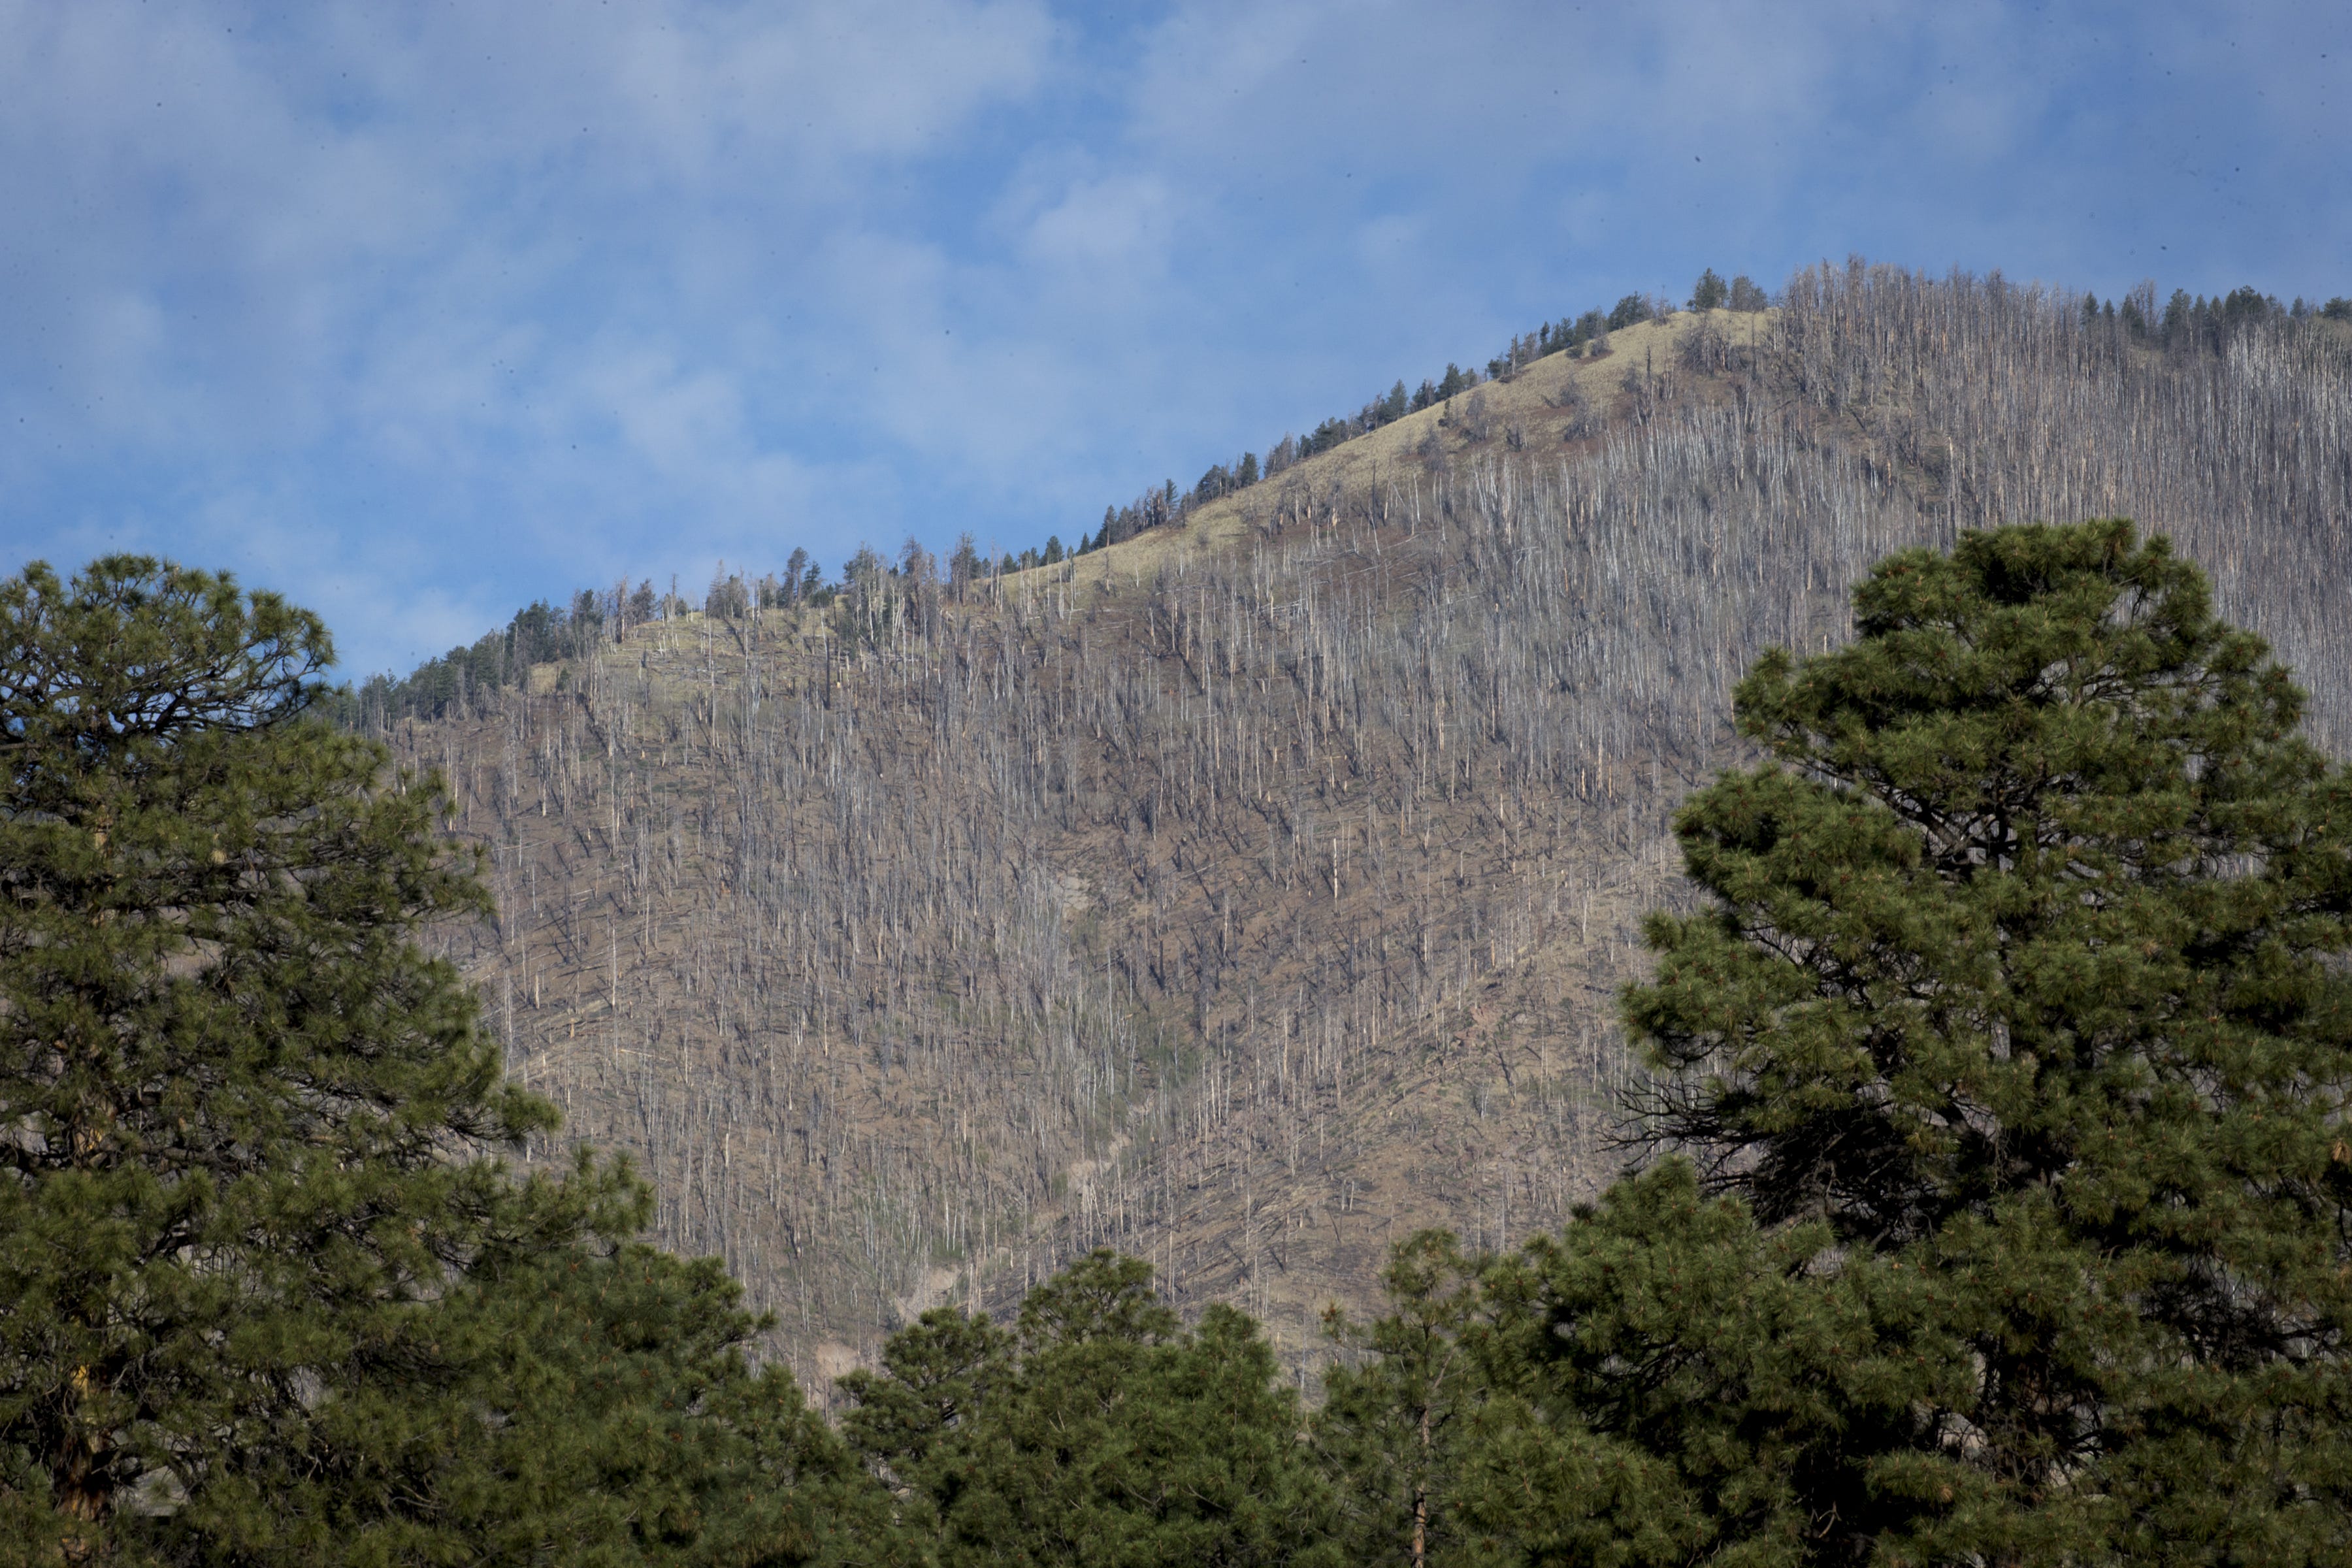 In 2018, the scar of the Schultz Fire remains in the Coconino National Forest near Flagstaff. The fire burned more than 15,000 acres in June 2010.